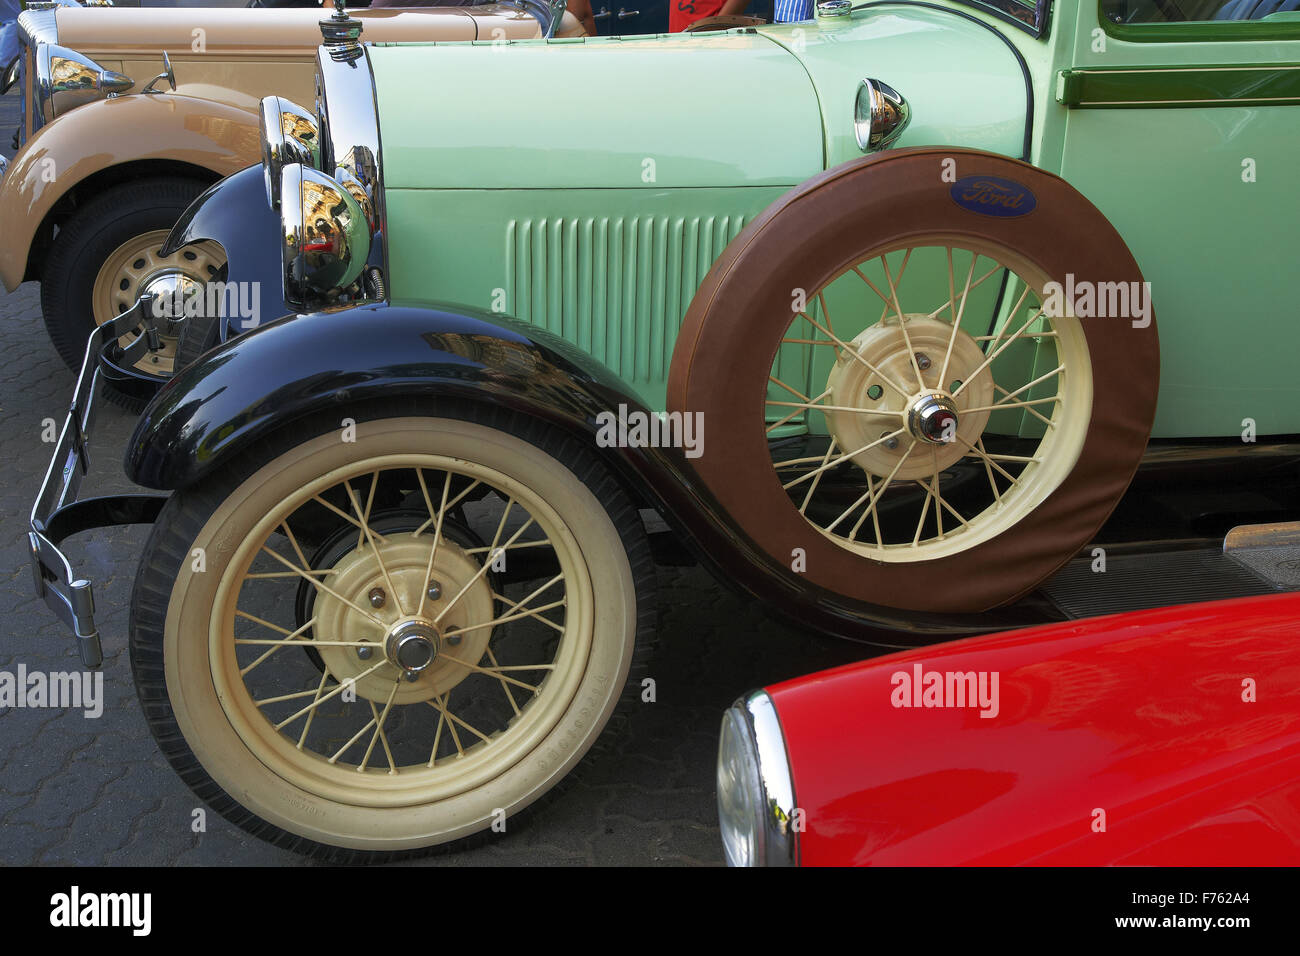 Ford old car, Ford vintage car, Ford antique car, Ford classic car Stock Photo